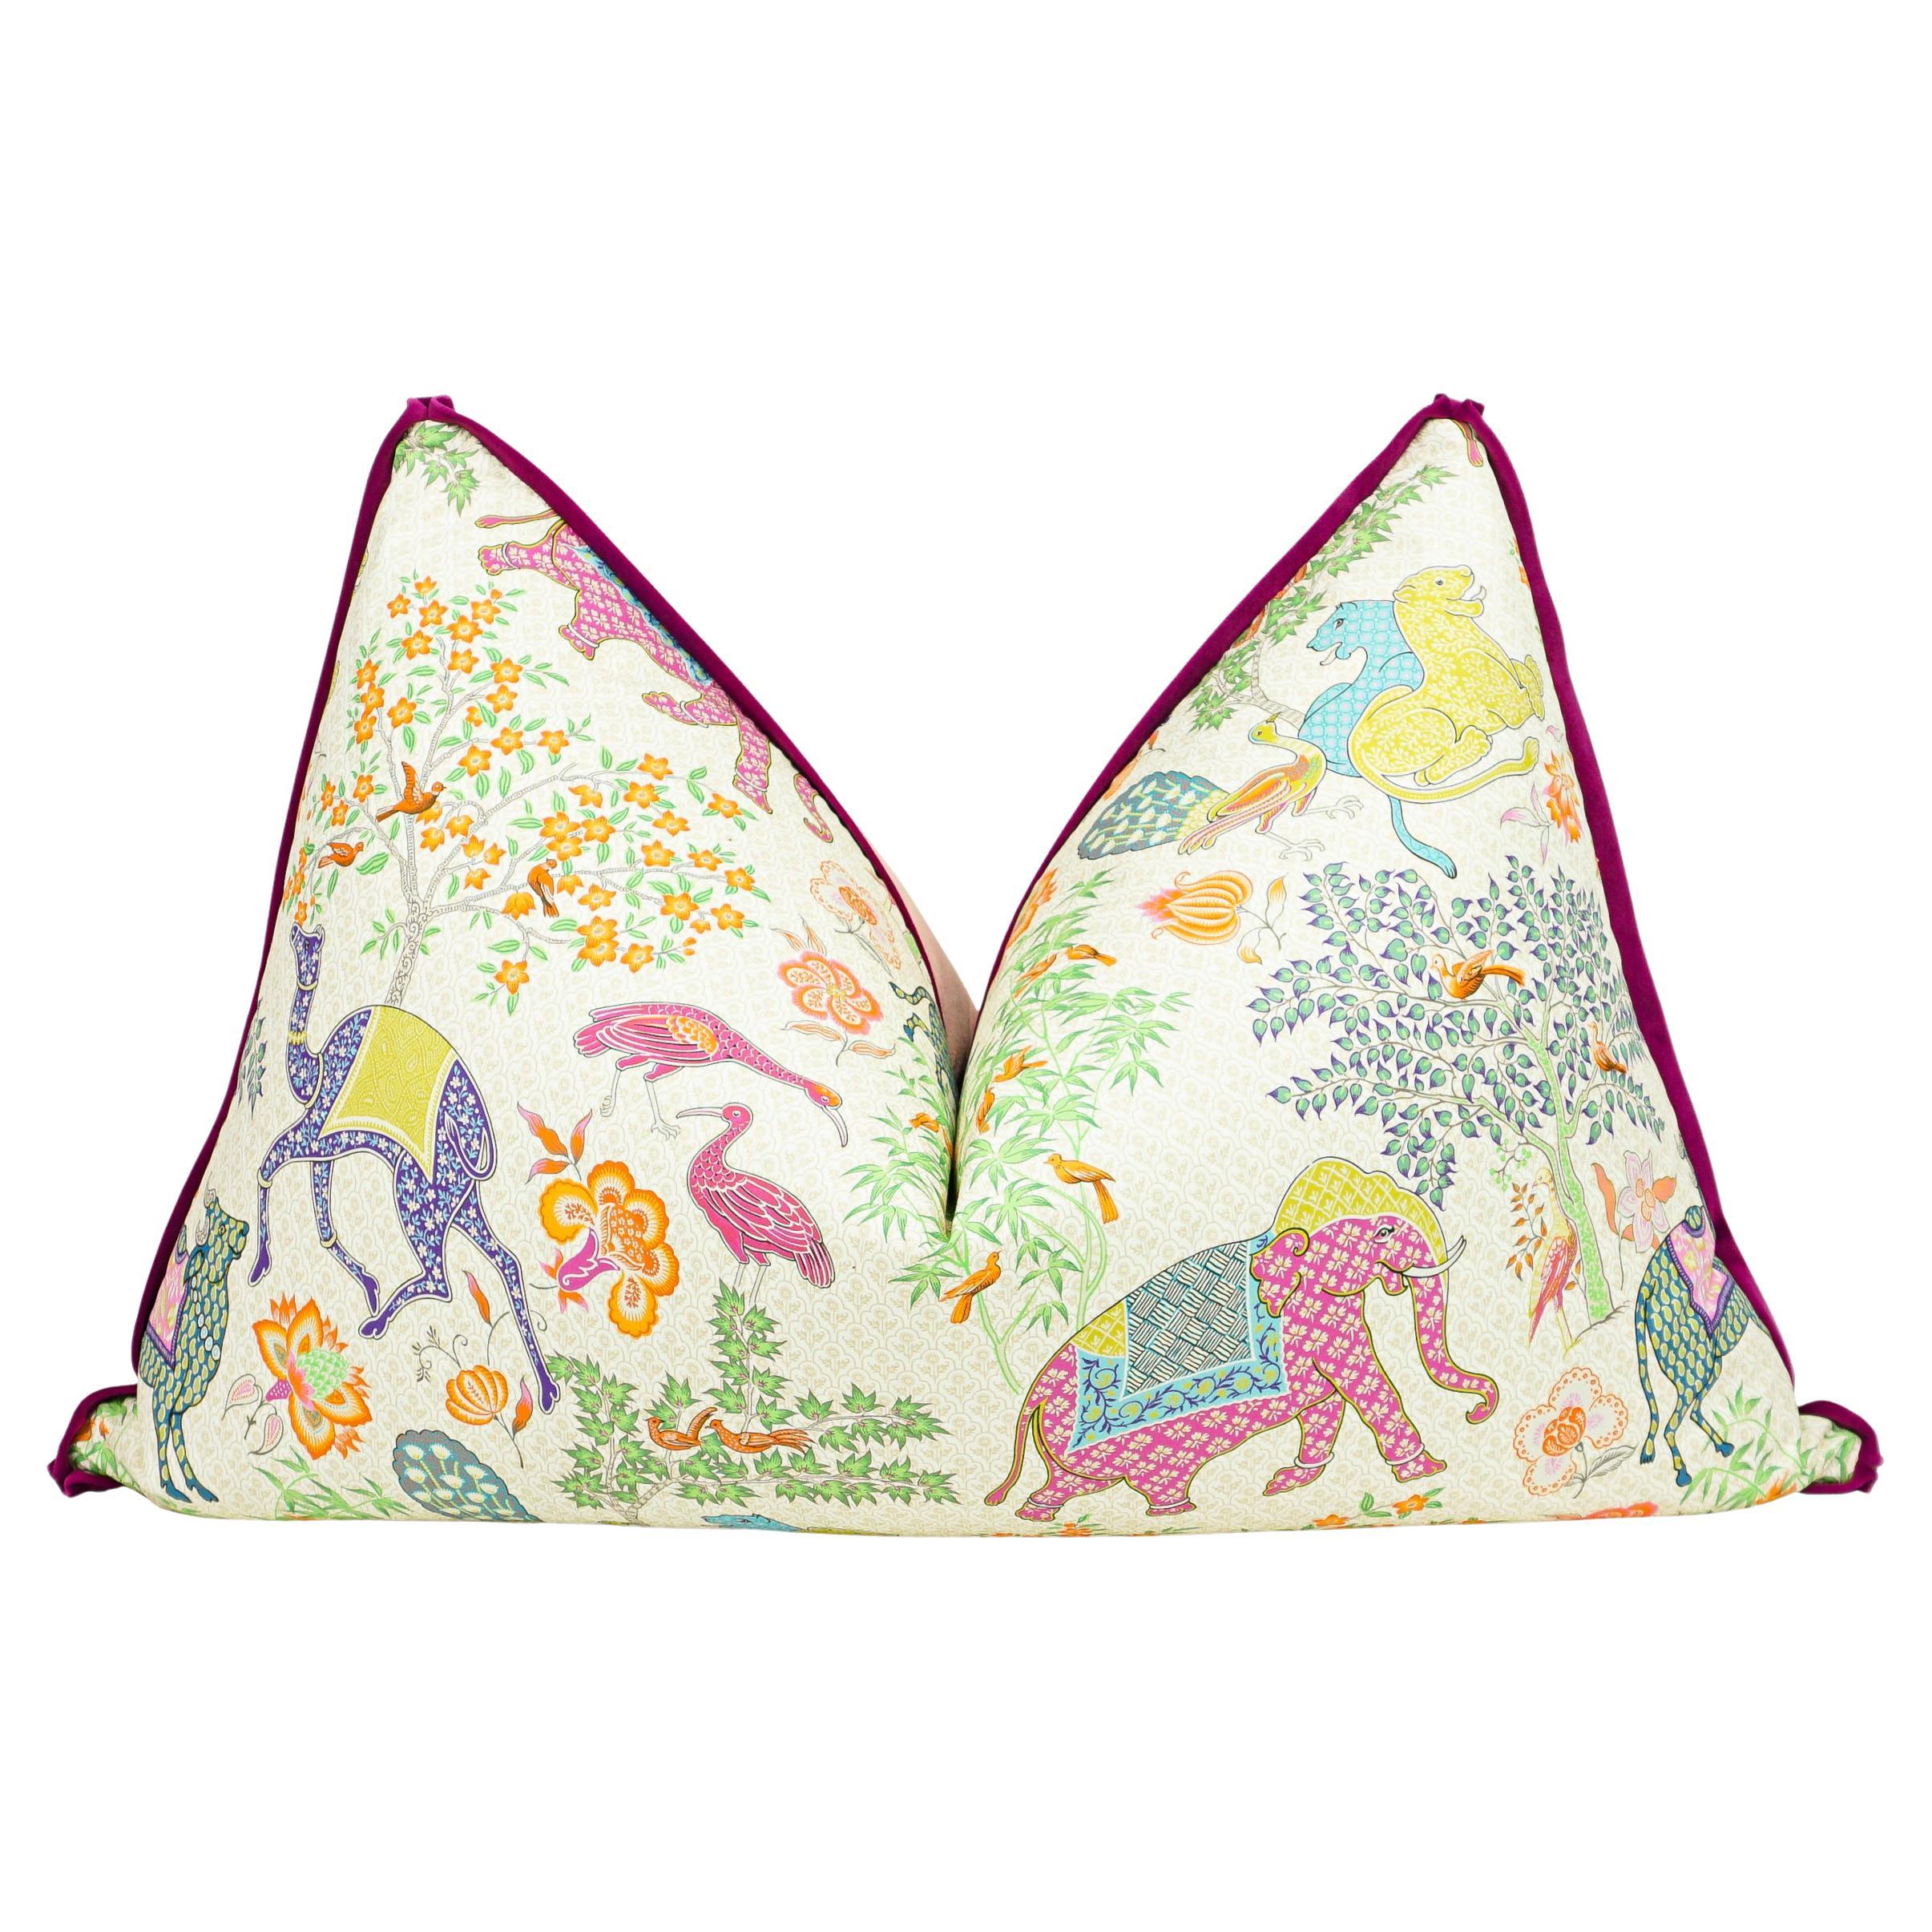 Playful printed cotton featuring elephant, camel, lion and emu. Lush berry velvet flange and medium pink silky velvet back. Made with invisible zipper and custom down/feather insert. Price per pillow.

Measurements:
Overall: 40”W x 12”D x